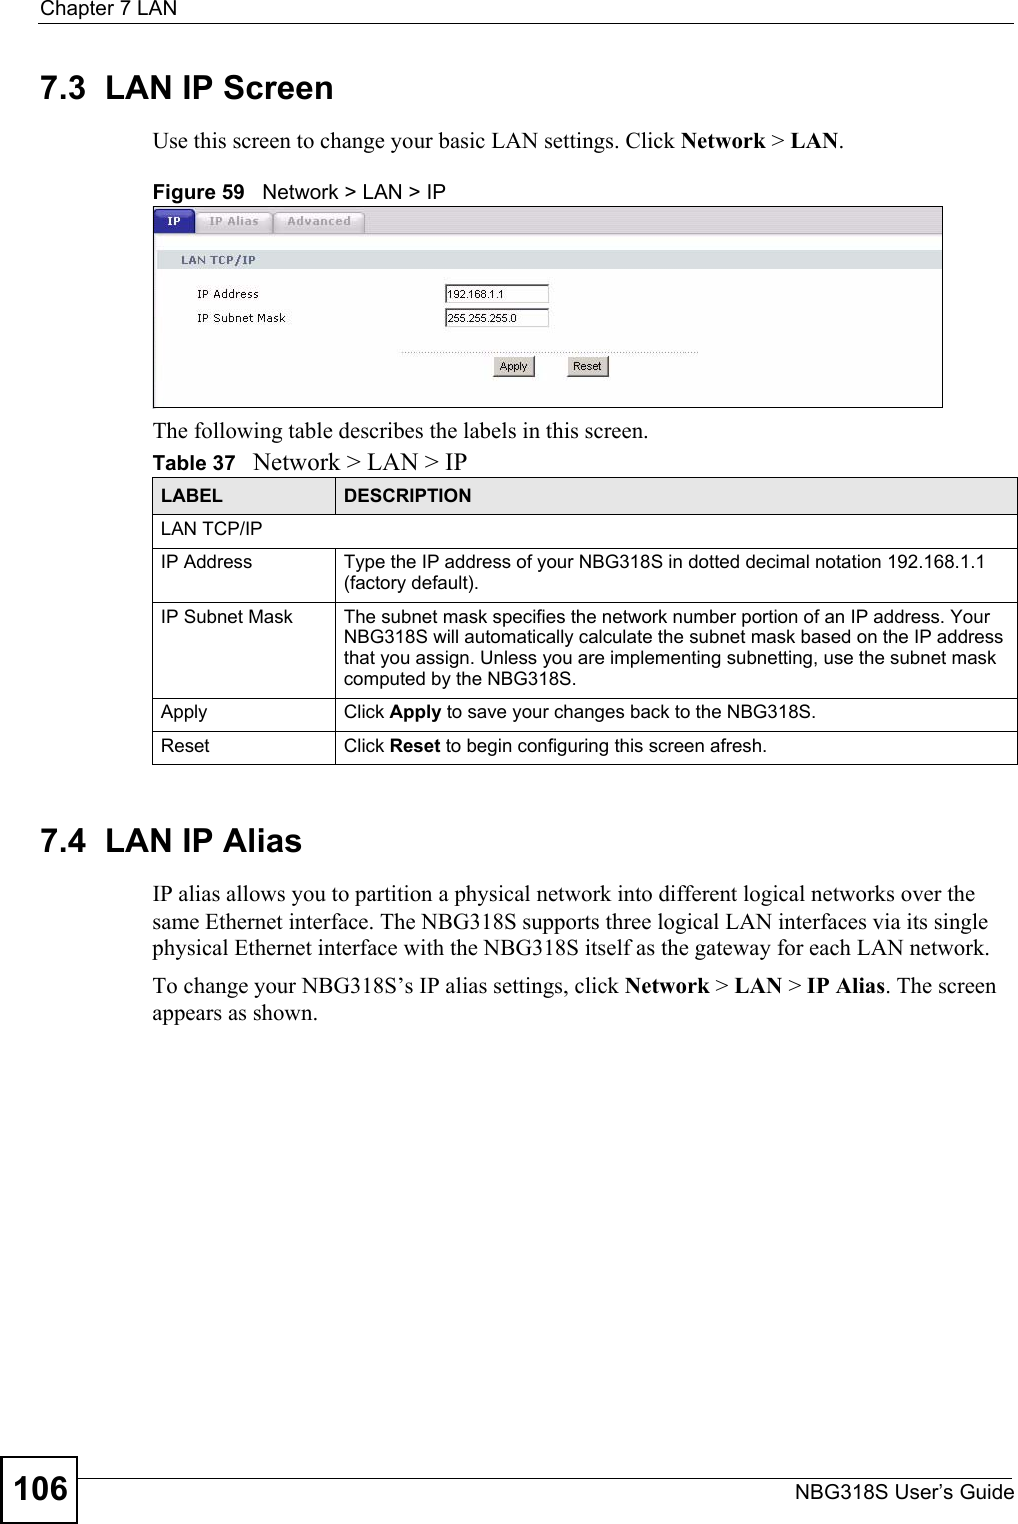 Chapter 7 LANNBG318S User’s Guide1067.3  LAN IP ScreenUse this screen to change your basic LAN settings. Click Network &gt; LAN.Figure 59   Network &gt; LAN &gt; IP The following table describes the labels in this screen.7.4  LAN IP Alias IP alias allows you to partition a physical network into different logical networks over the same Ethernet interface. The NBG318S supports three logical LAN interfaces via its single physical Ethernet interface with the NBG318S itself as the gateway for each LAN network.To change your NBG318S’s IP alias settings, click Network &gt; LAN &gt; IP Alias. The screen appears as shown.Table 37   Network &gt; LAN &gt; IPLABEL DESCRIPTIONLAN TCP/IPIP Address Type the IP address of your NBG318S in dotted decimal notation 192.168.1.1 (factory default).IP Subnet Mask The subnet mask specifies the network number portion of an IP address. Your NBG318S will automatically calculate the subnet mask based on the IP address that you assign. Unless you are implementing subnetting, use the subnet mask computed by the NBG318S.Apply Click Apply to save your changes back to the NBG318S.Reset Click Reset to begin configuring this screen afresh.